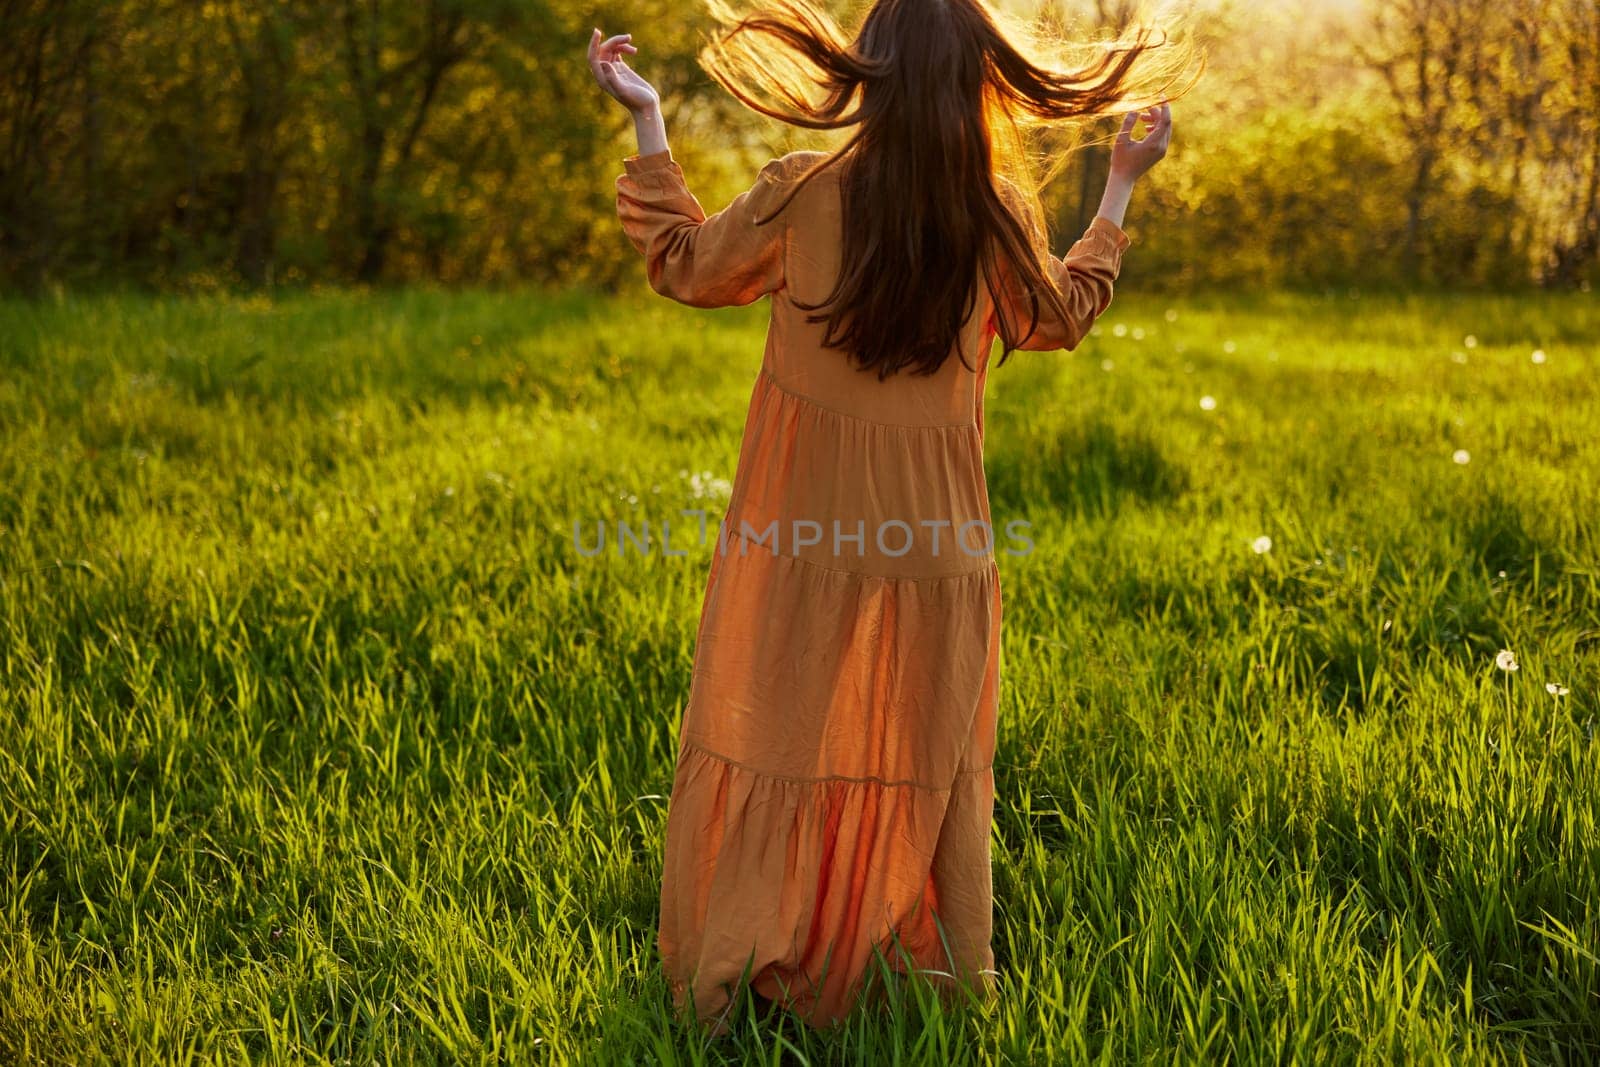 a slender woman stands in a long orange dress with her back to the camera illuminated by the sunset rays and tosses her long hair. High quality photo